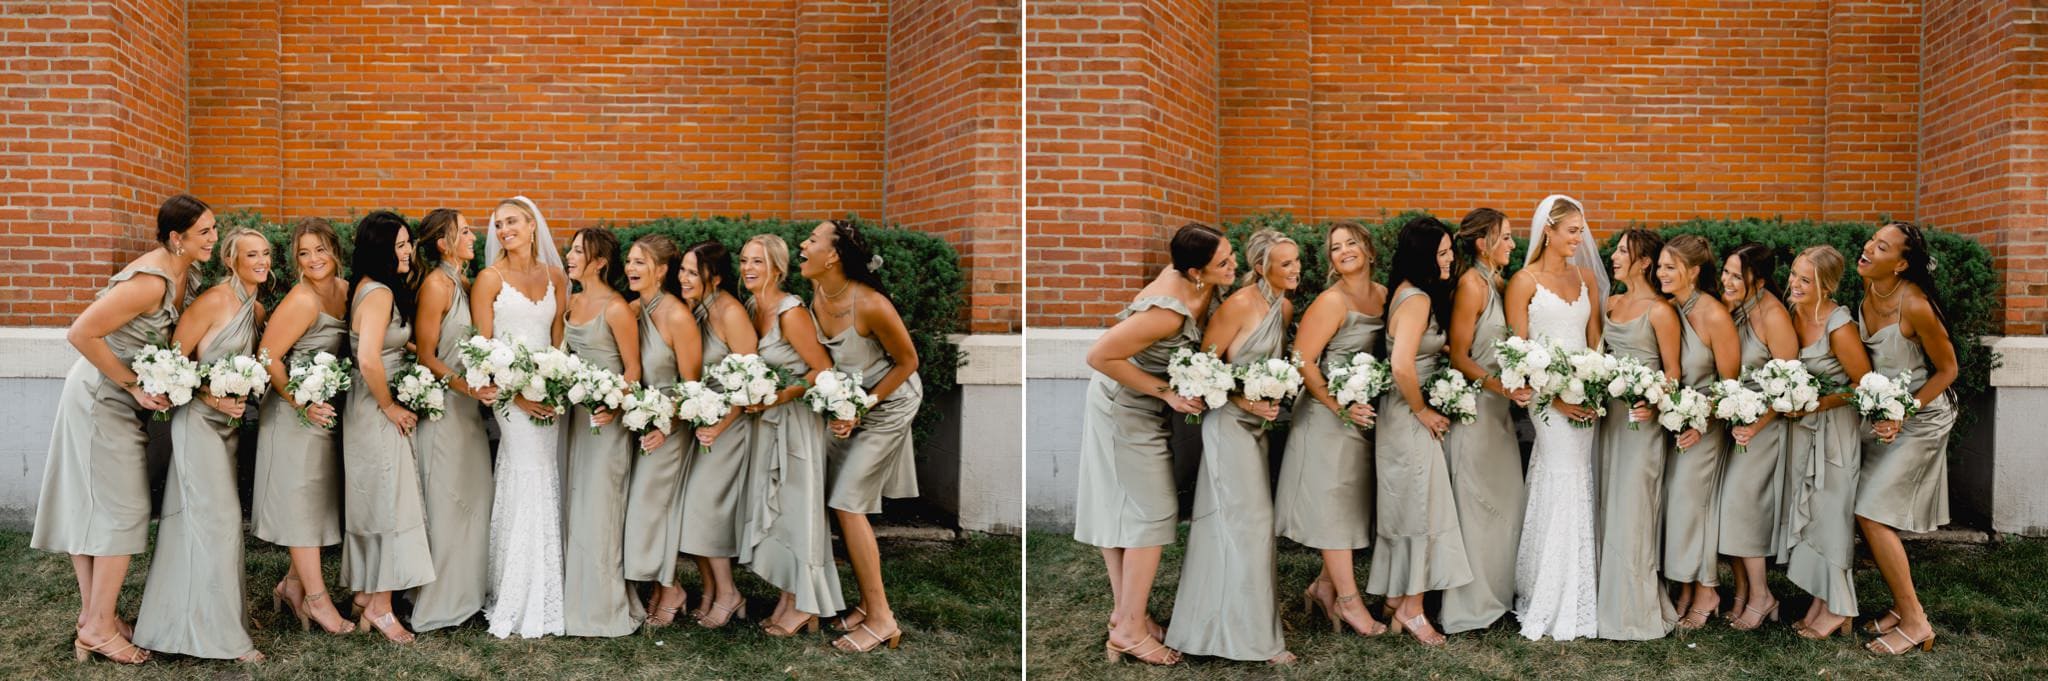 bride and bridemaids portrait outside of church